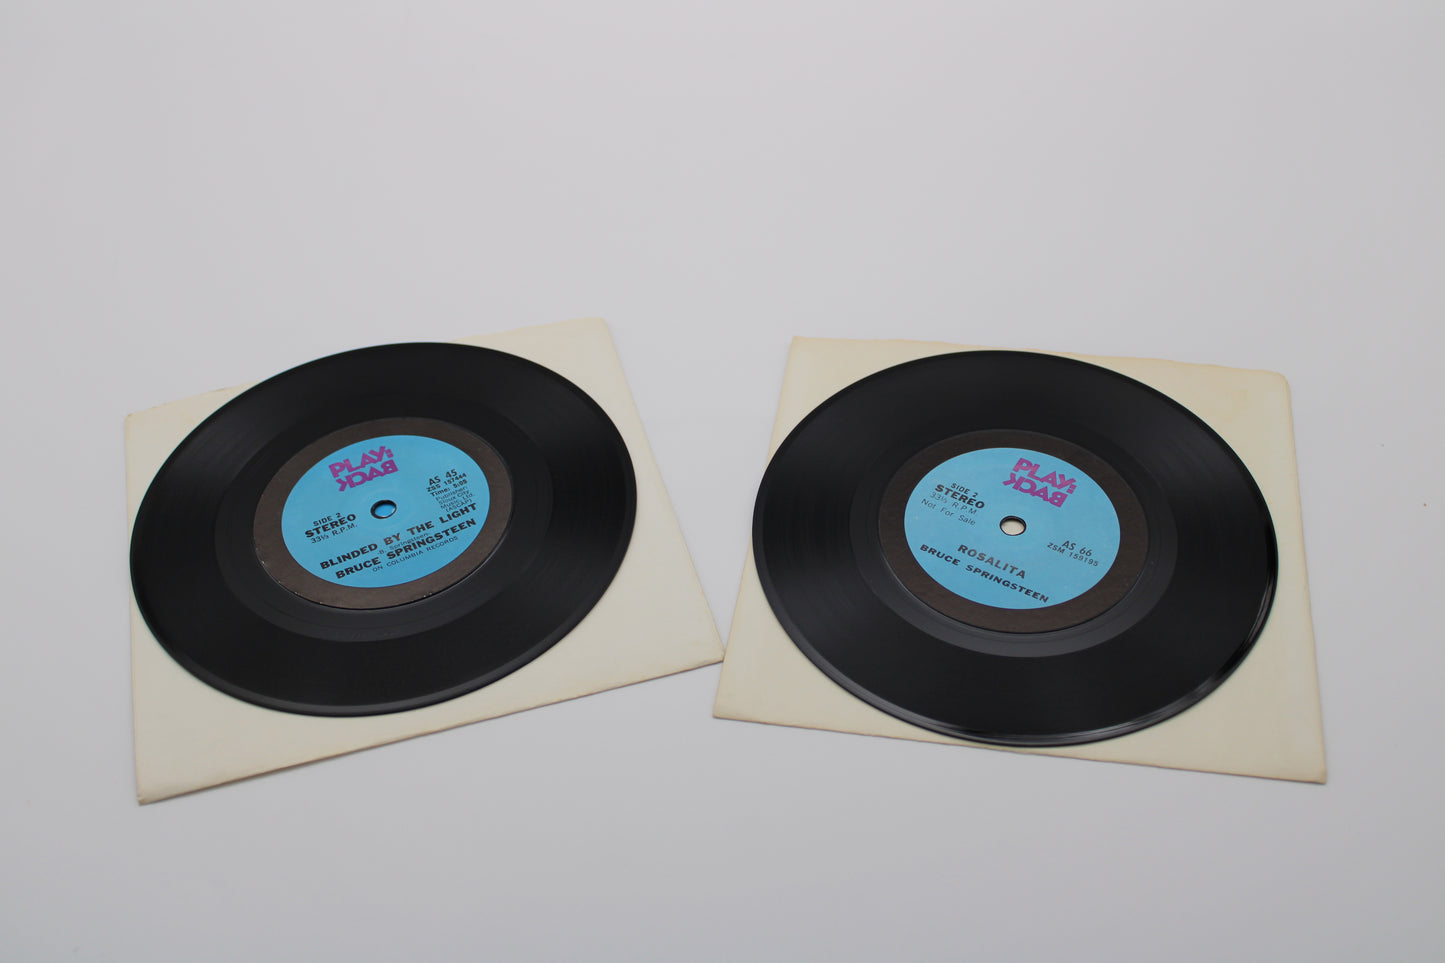 Bruce Springsteen 45 Records, Blinded By The Light & Rosalita - Collectible PlayBack